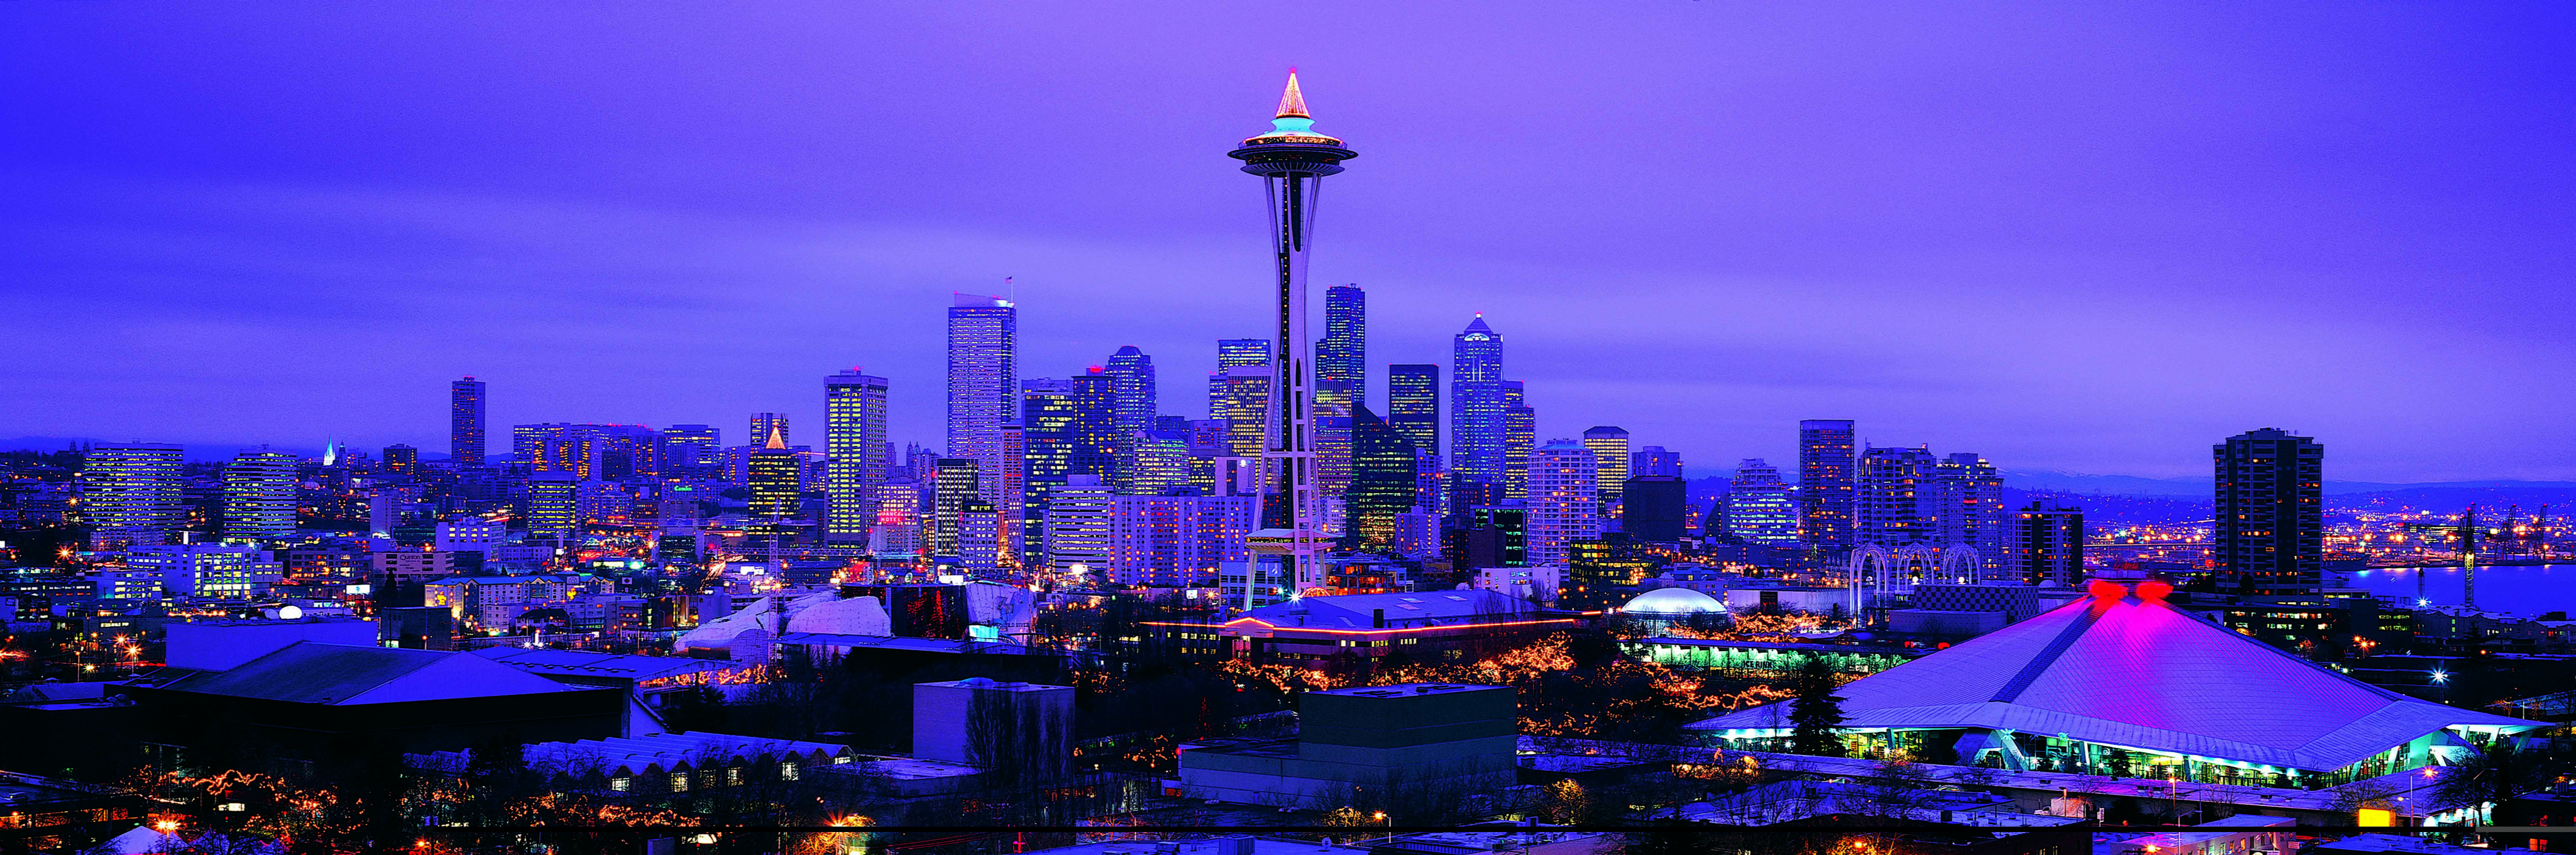 cityscape of space needle tower, american